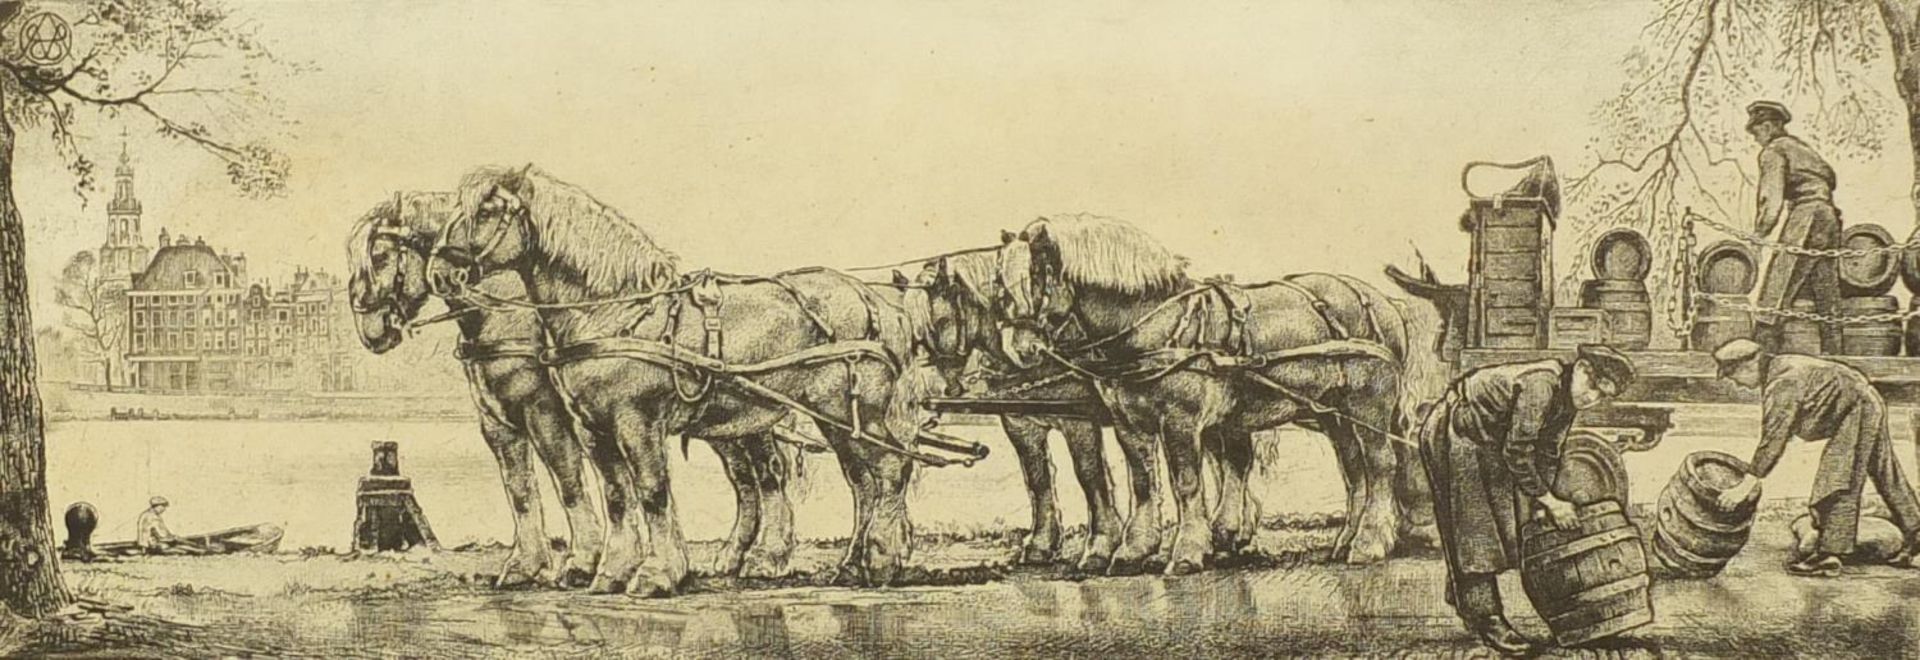 WG Hofker - Draymen unloading horse and cart before canal, Continental etching in white painted